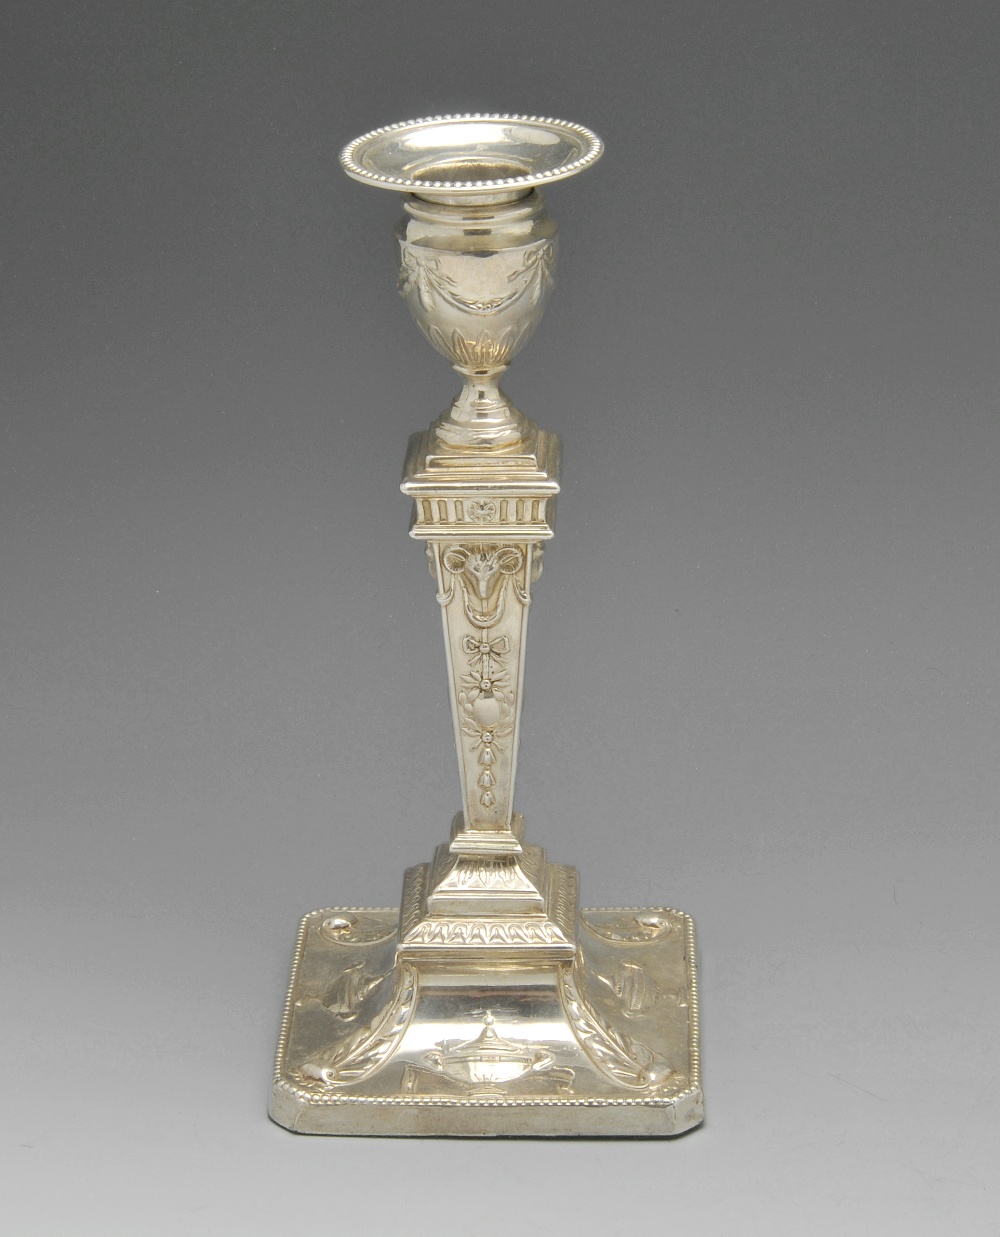 An Edwardian silver mounted candlestick of Neoclassical style, the urn shaped socket raised upon